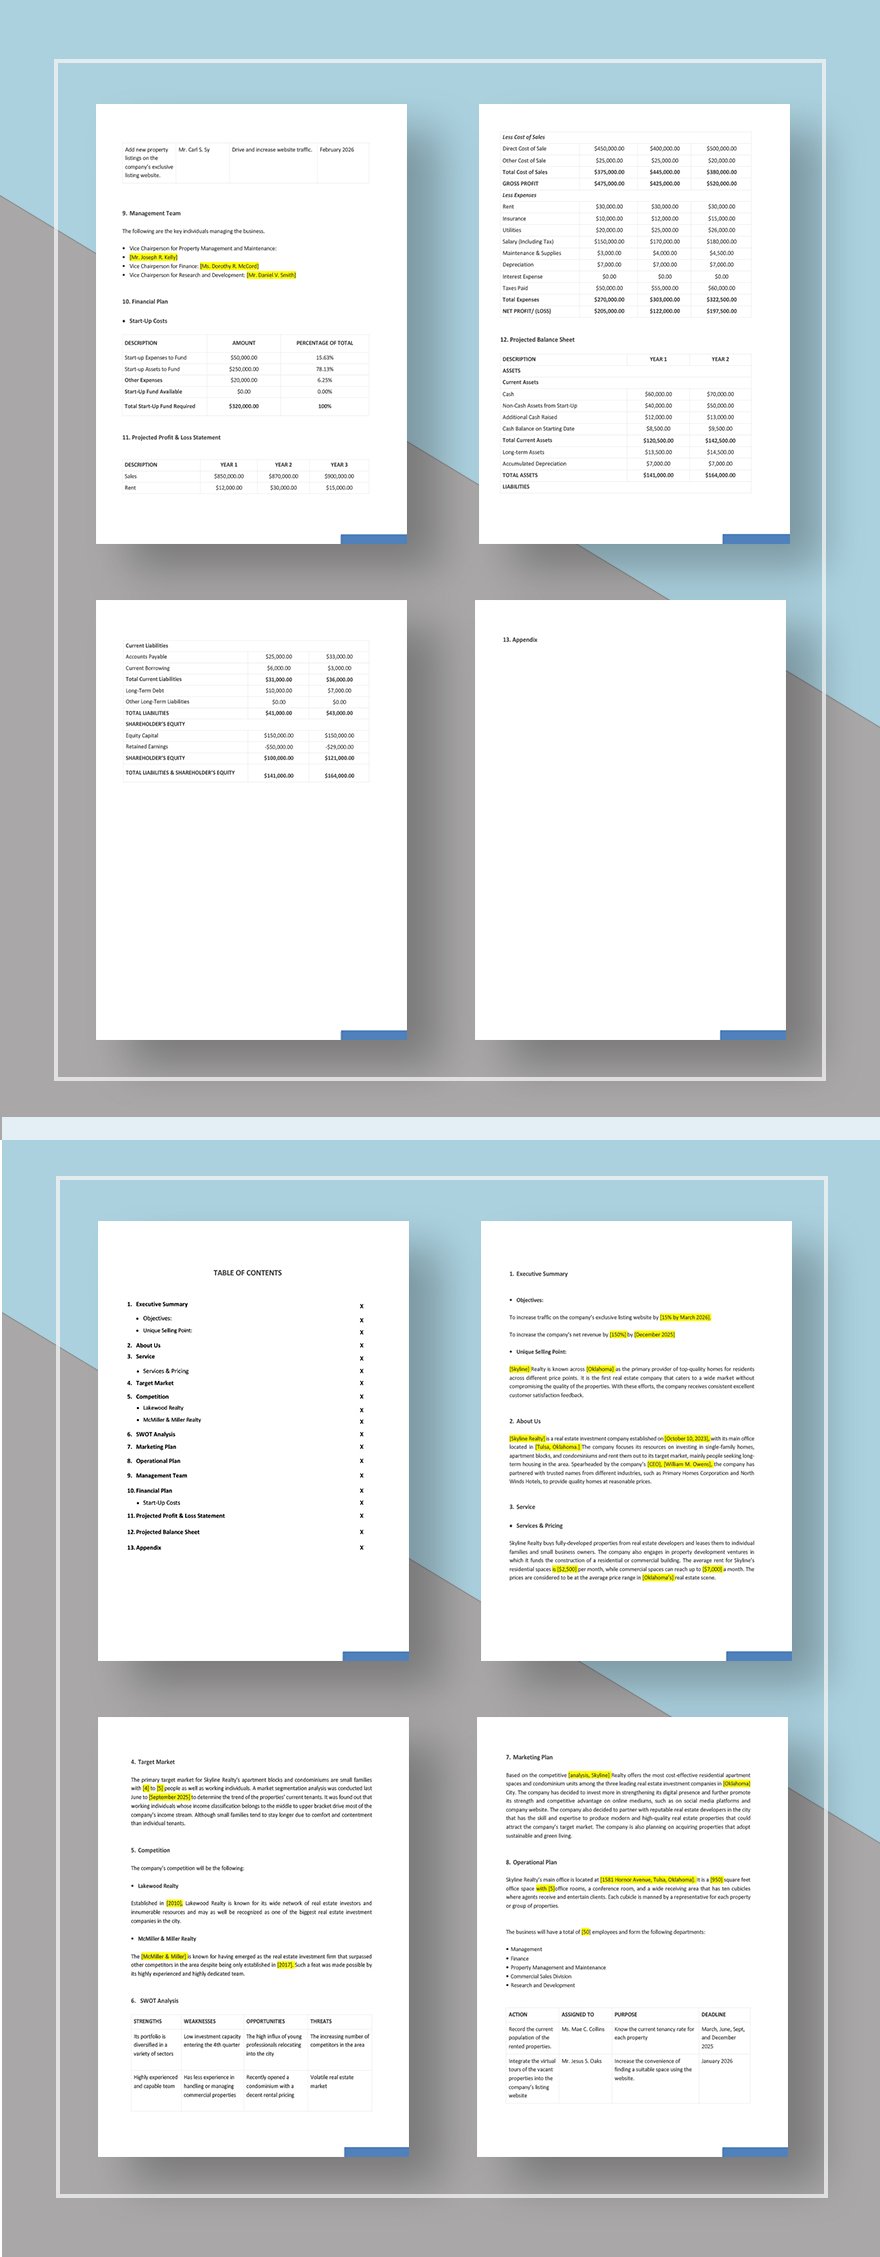 free-real-estate-investing-business-plan-template-download-in-word